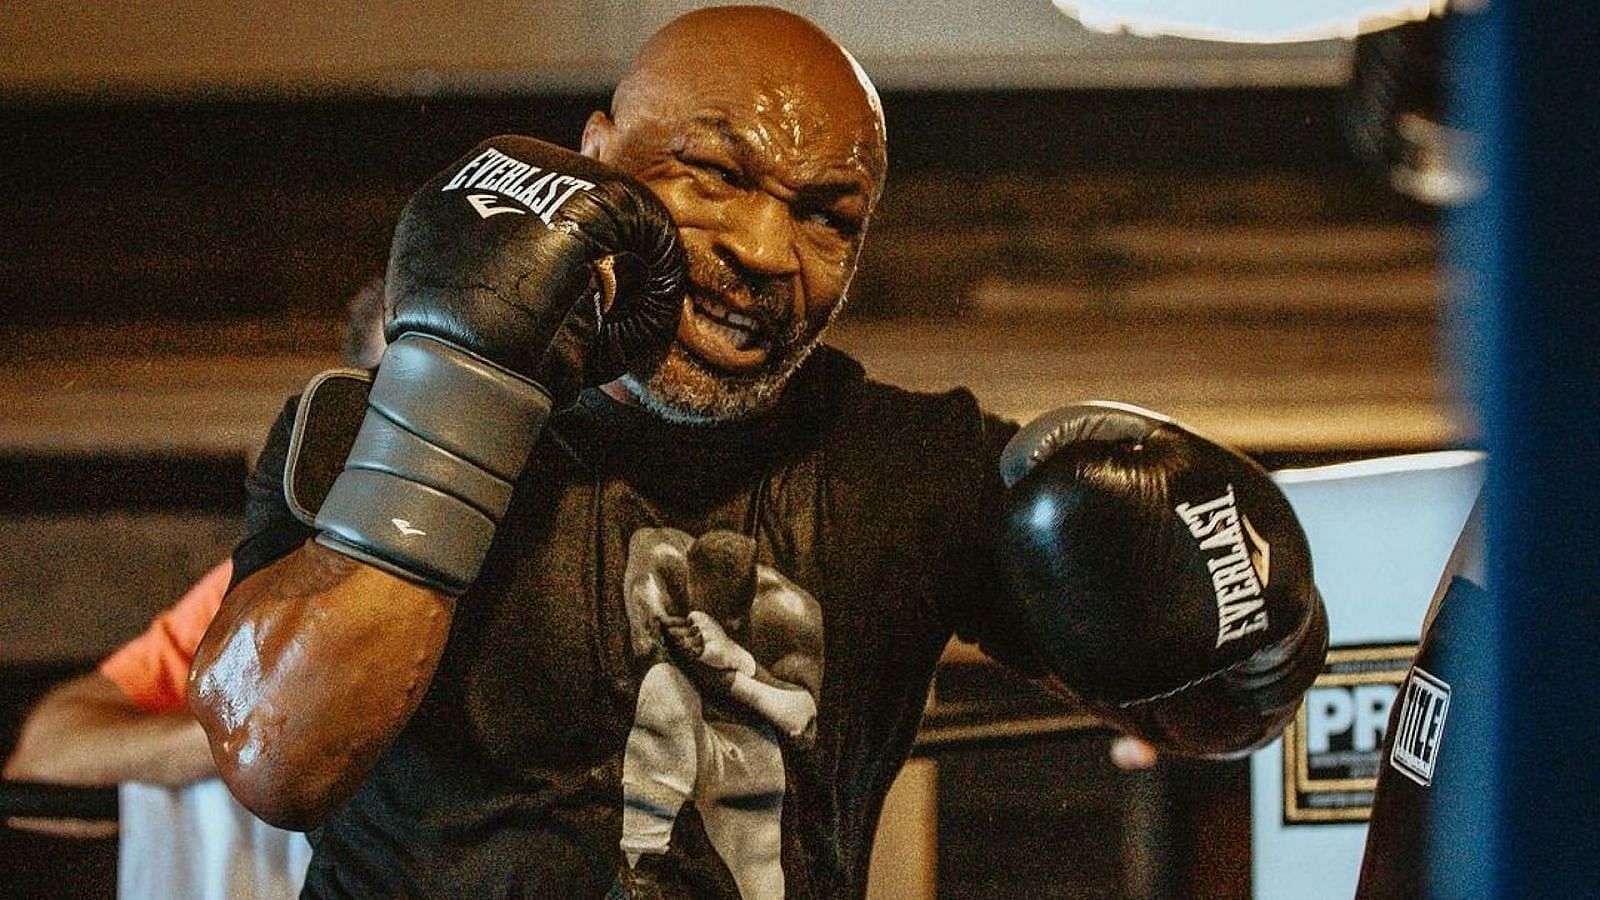 Mike Tyson during one of his training sessions [Image Credits:- Instagram @ miketyson]